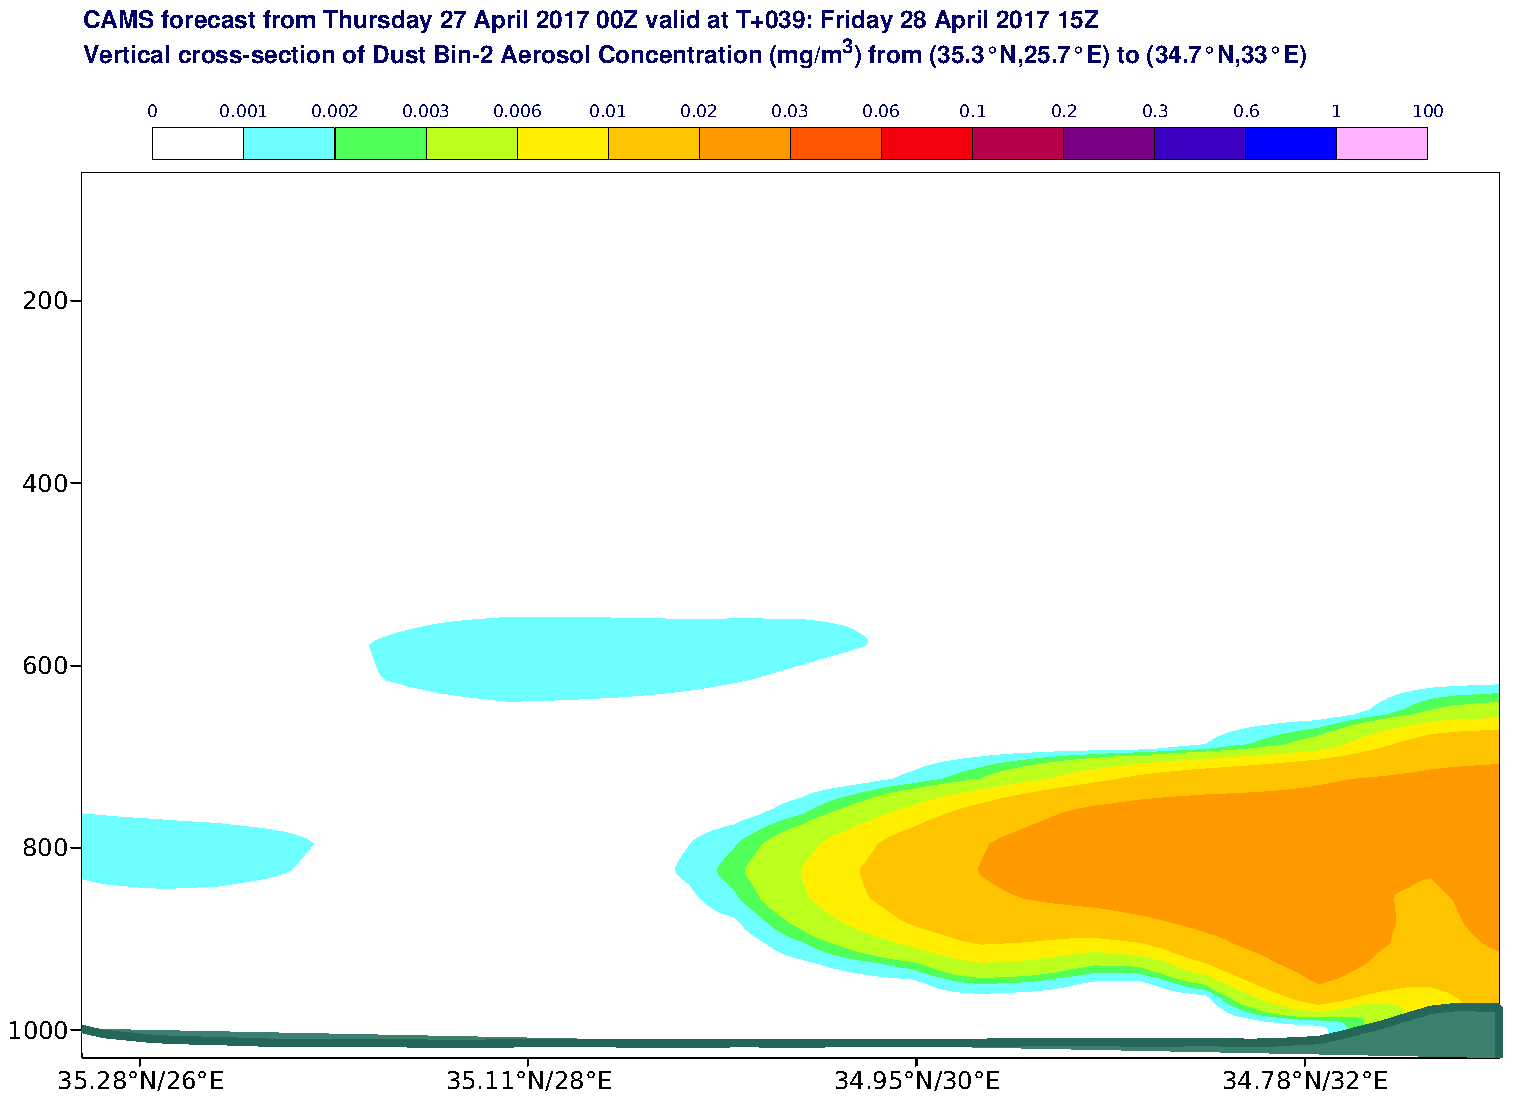 Vertical cross-section of Dust Bin-2 Aerosol Concentration (mg/m3) valid at T39 - 2017-04-28 15:00